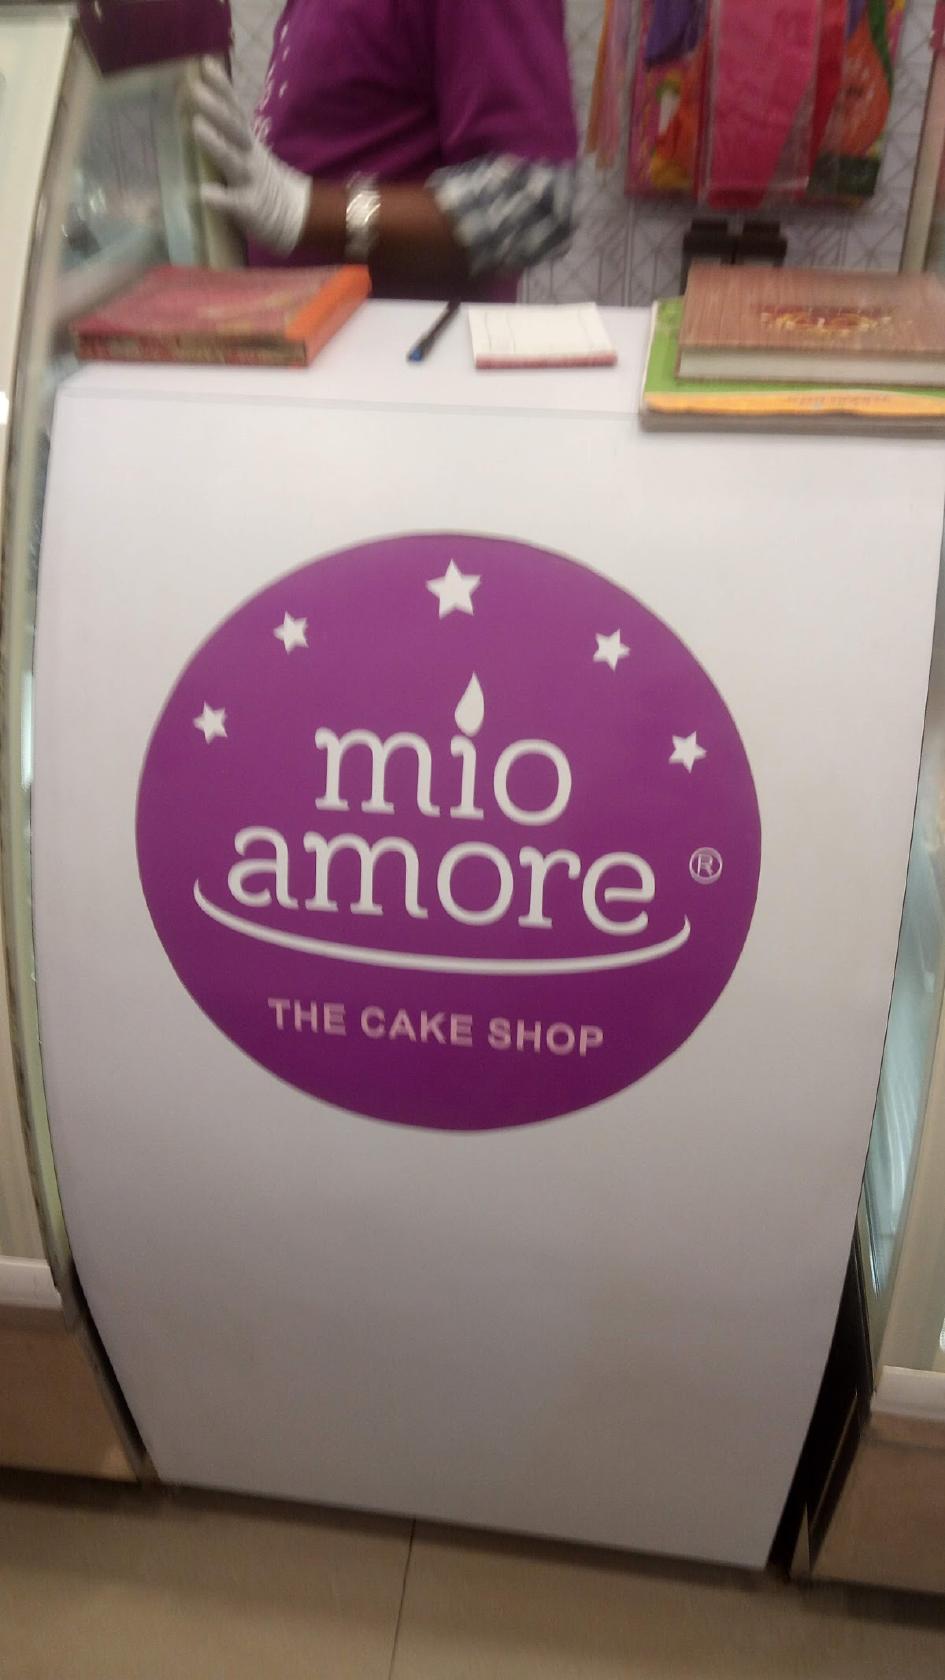 Top Mio Amore Cake Shops in Barrackpore - Best Mio Amore Cake Shops Kolkata  - Justdial